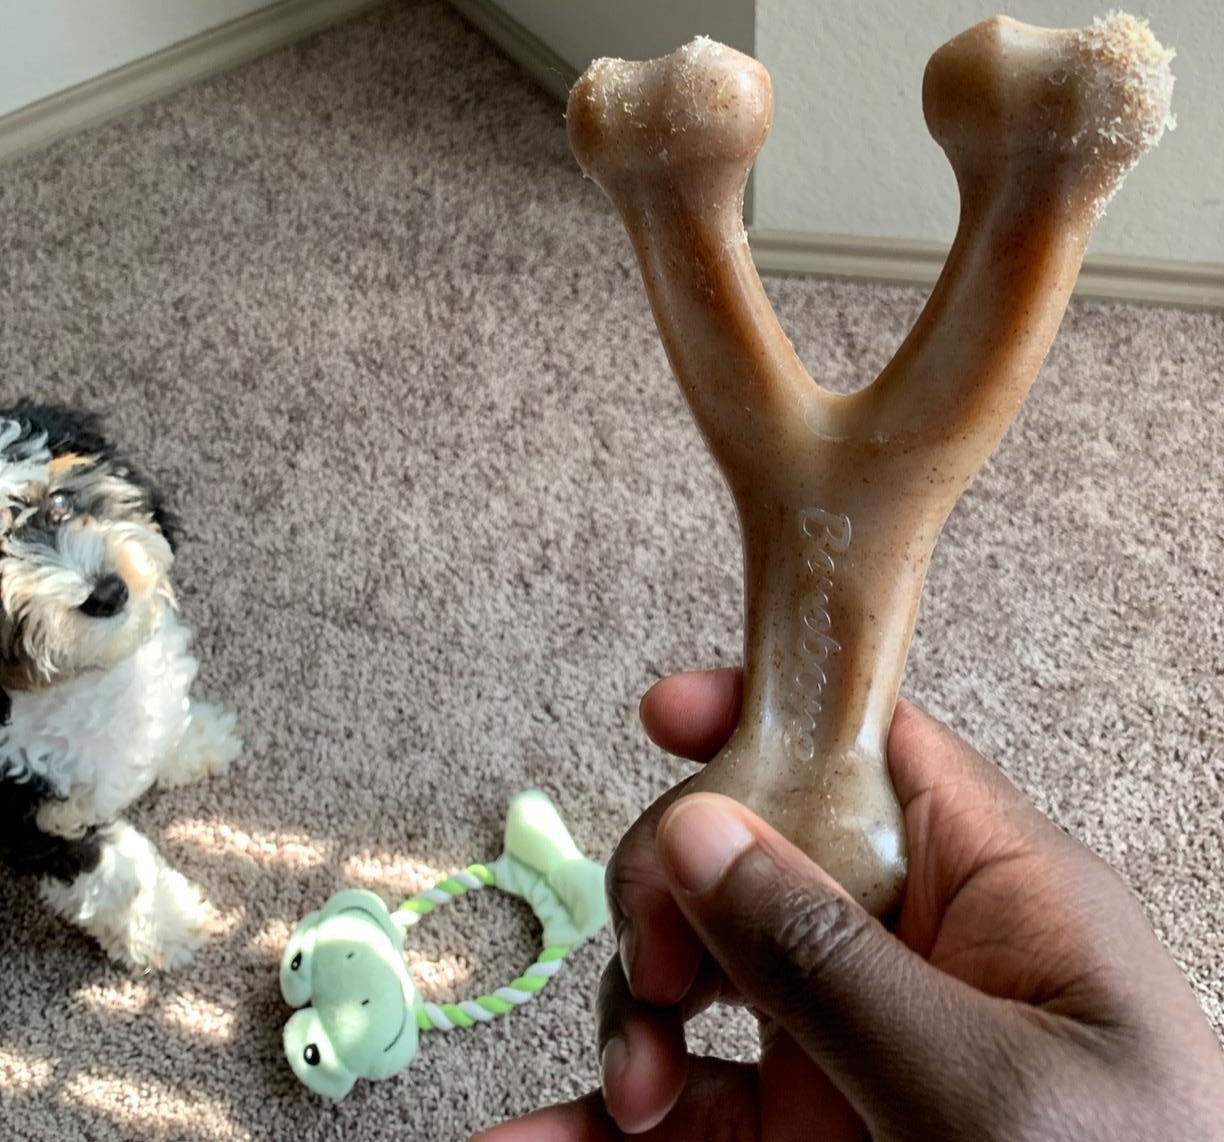 The bone held up in front of a dog